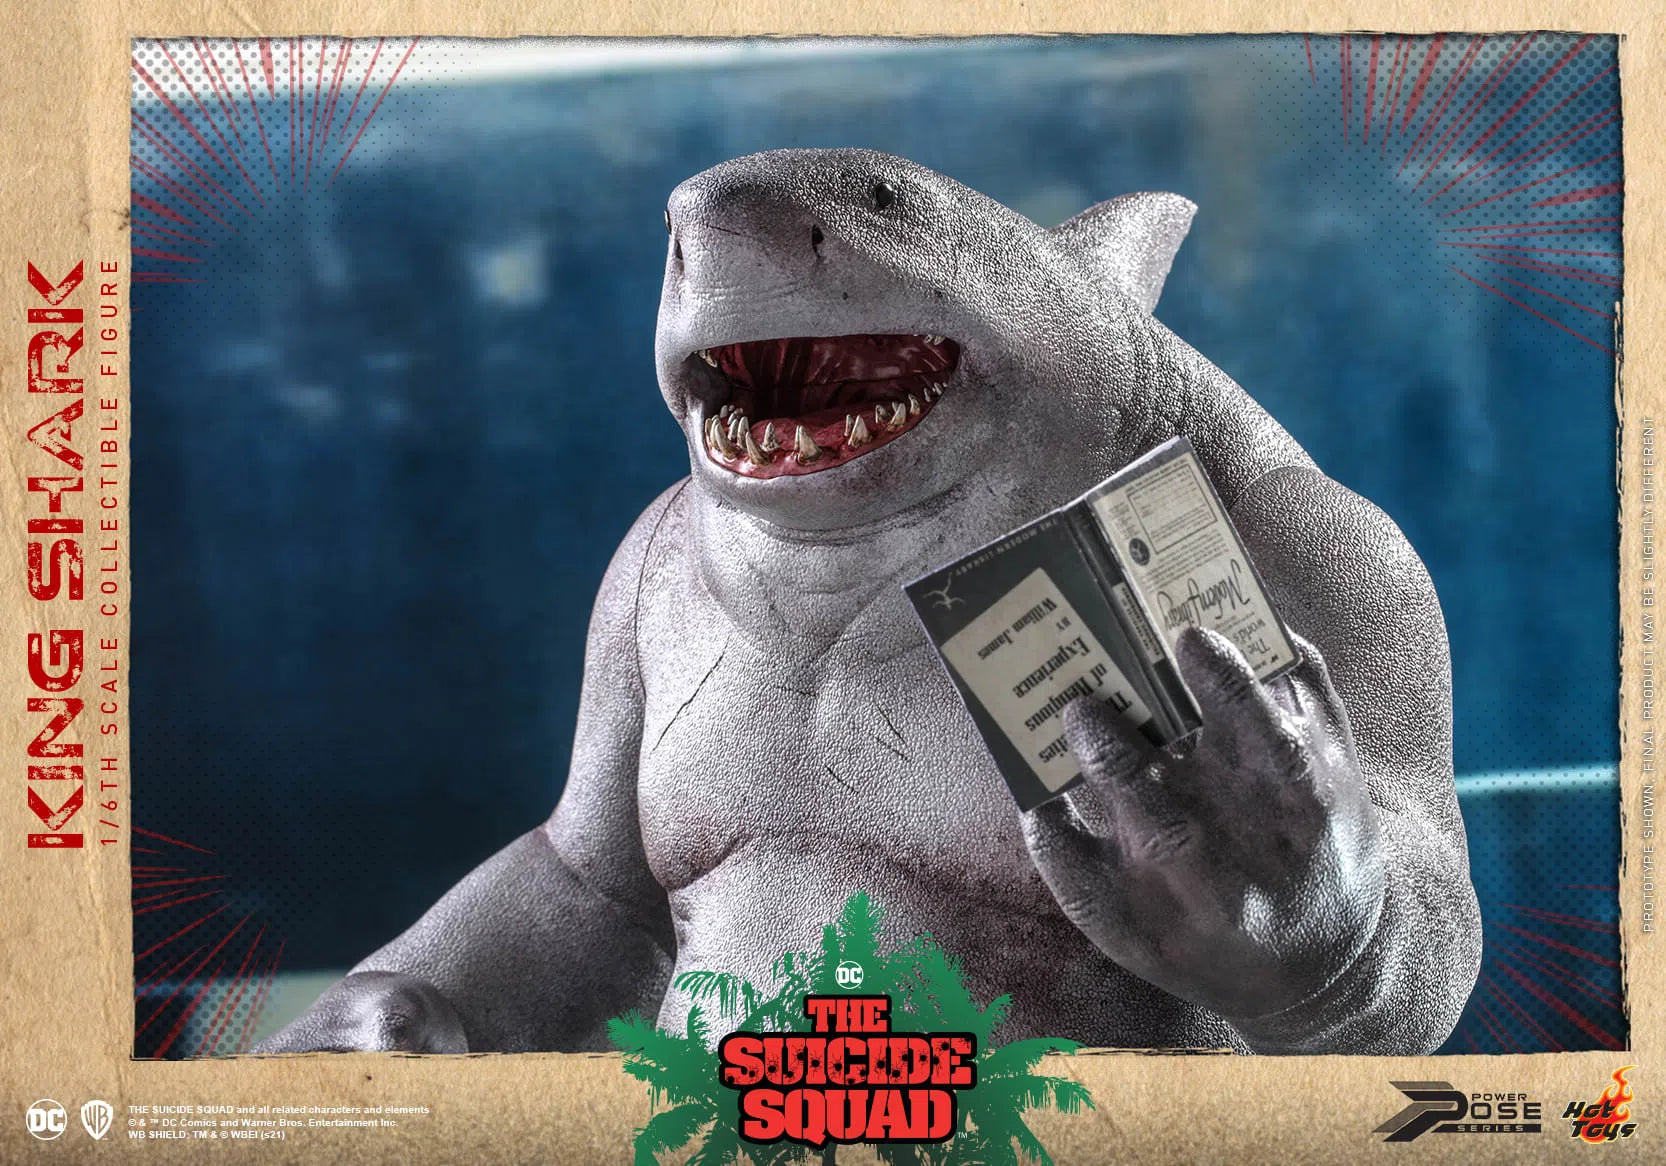 King Shark: The Suicide Squad: DC Comics: Power Pose: PPS006 Hot Toys